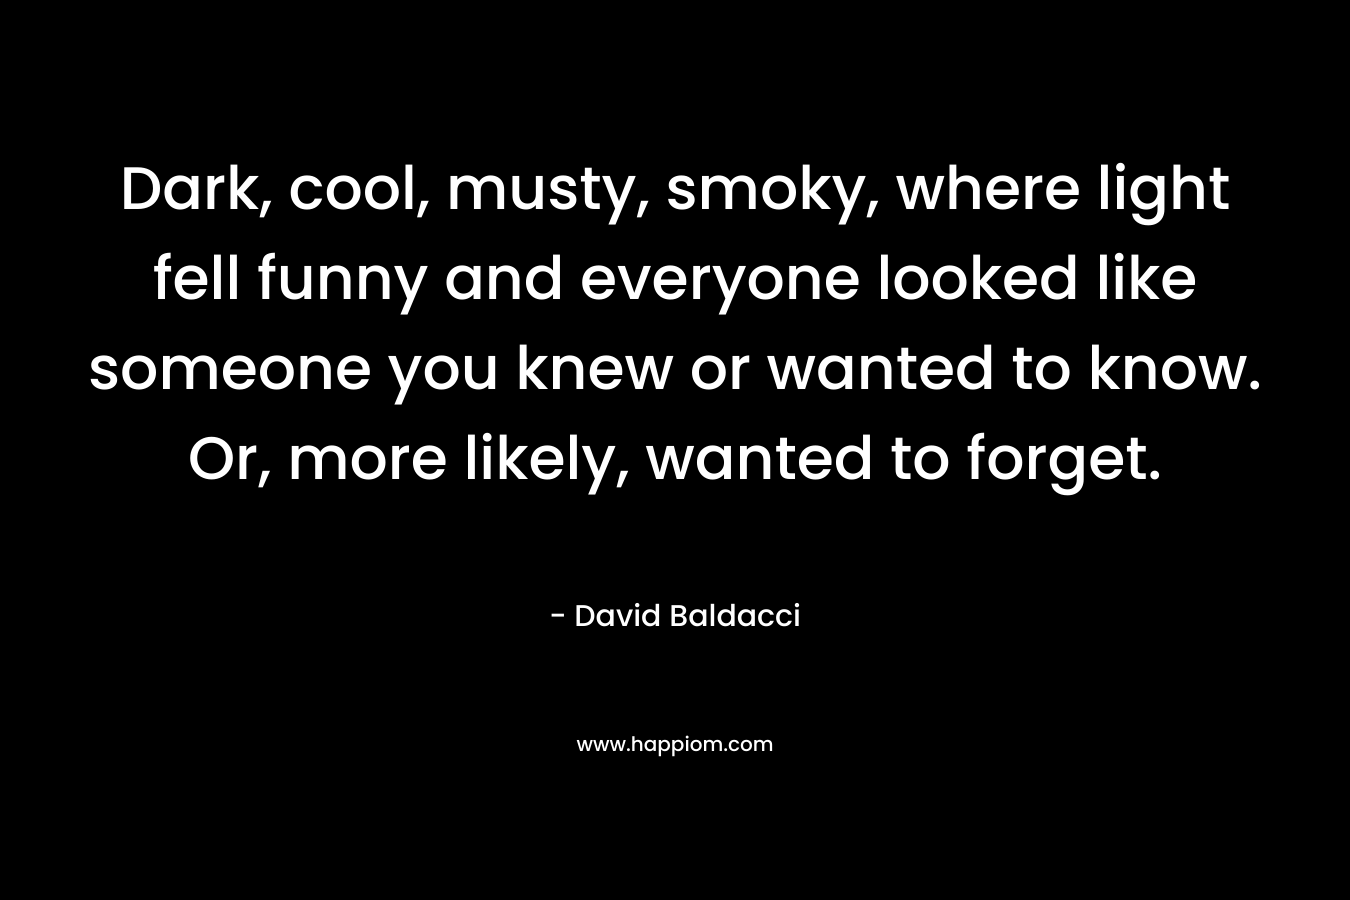 Dark, cool, musty, smoky, where light fell funny and everyone looked like someone you knew or wanted to know. Or, more likely, wanted to forget. – David Baldacci